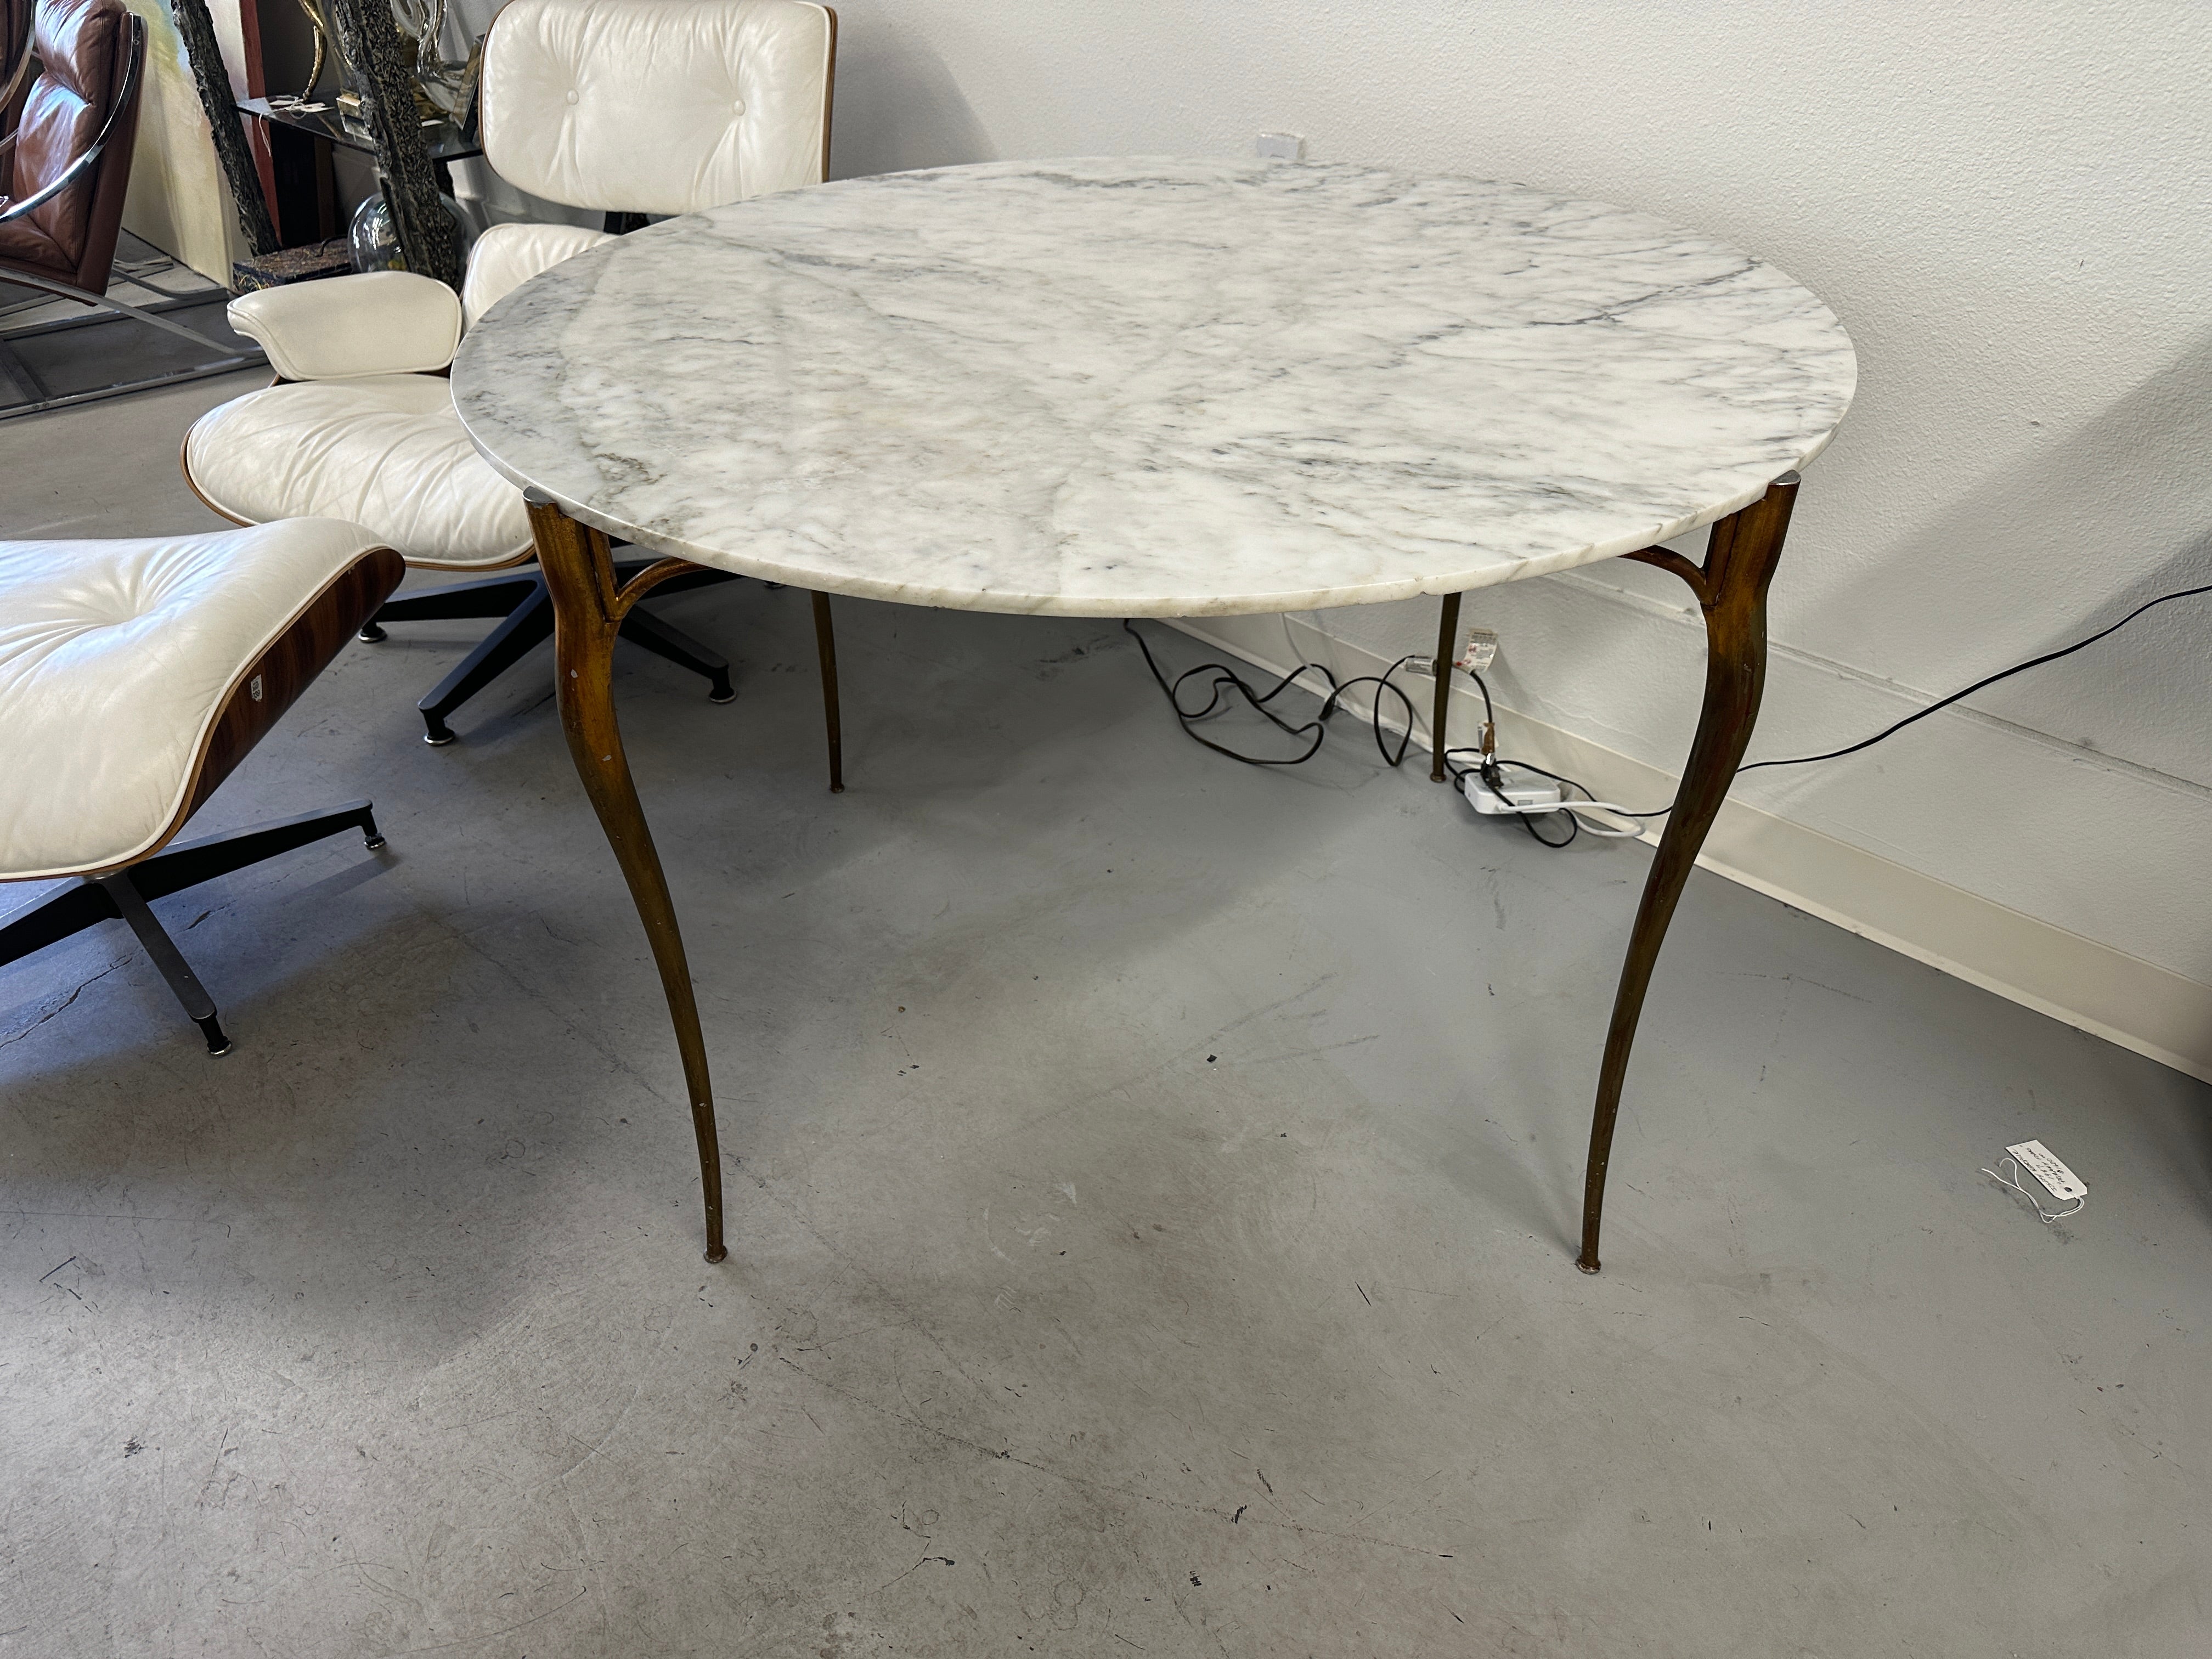 A wonderful Italian Gilt Aluminum and Marble dining table suitable in a Kitchen or small dining room. Very much reminiscent of the Italian masters like Gio Ponti or Ico Parisi. Flowing delicate legs and a simple but elegant apron. The round marble